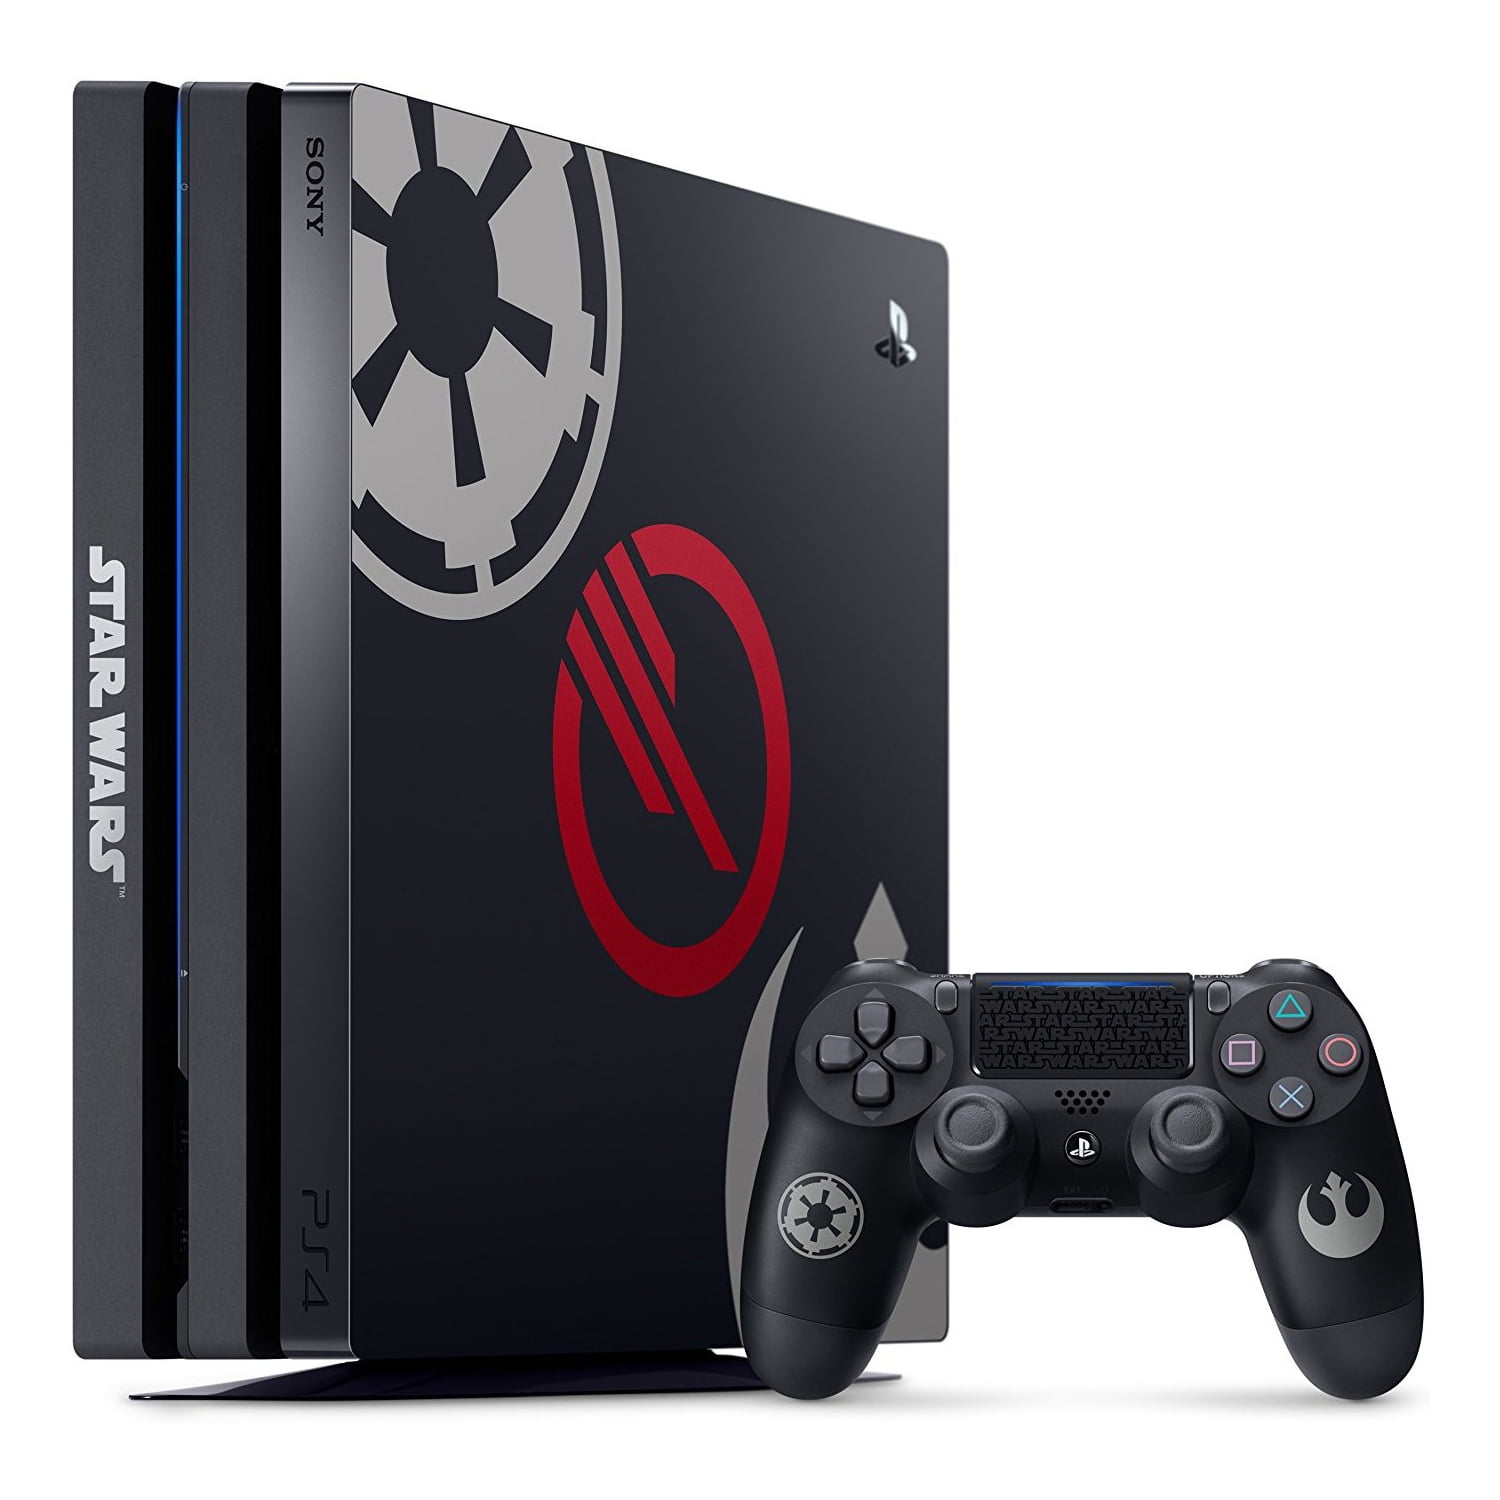 star wars for ps4